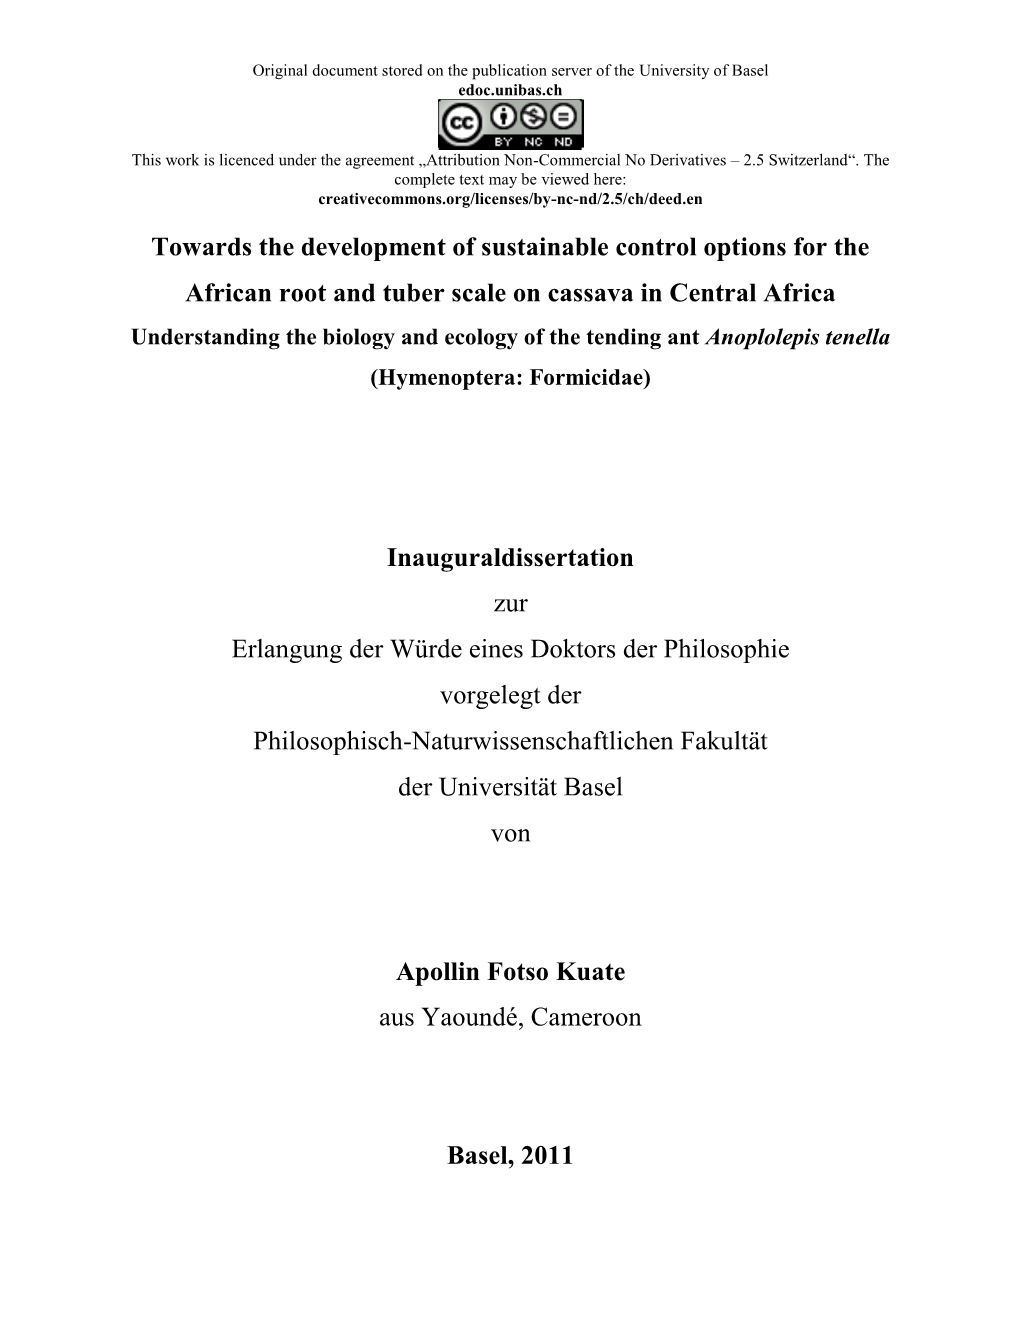 Towards the Development of Sustainable Control Options for The